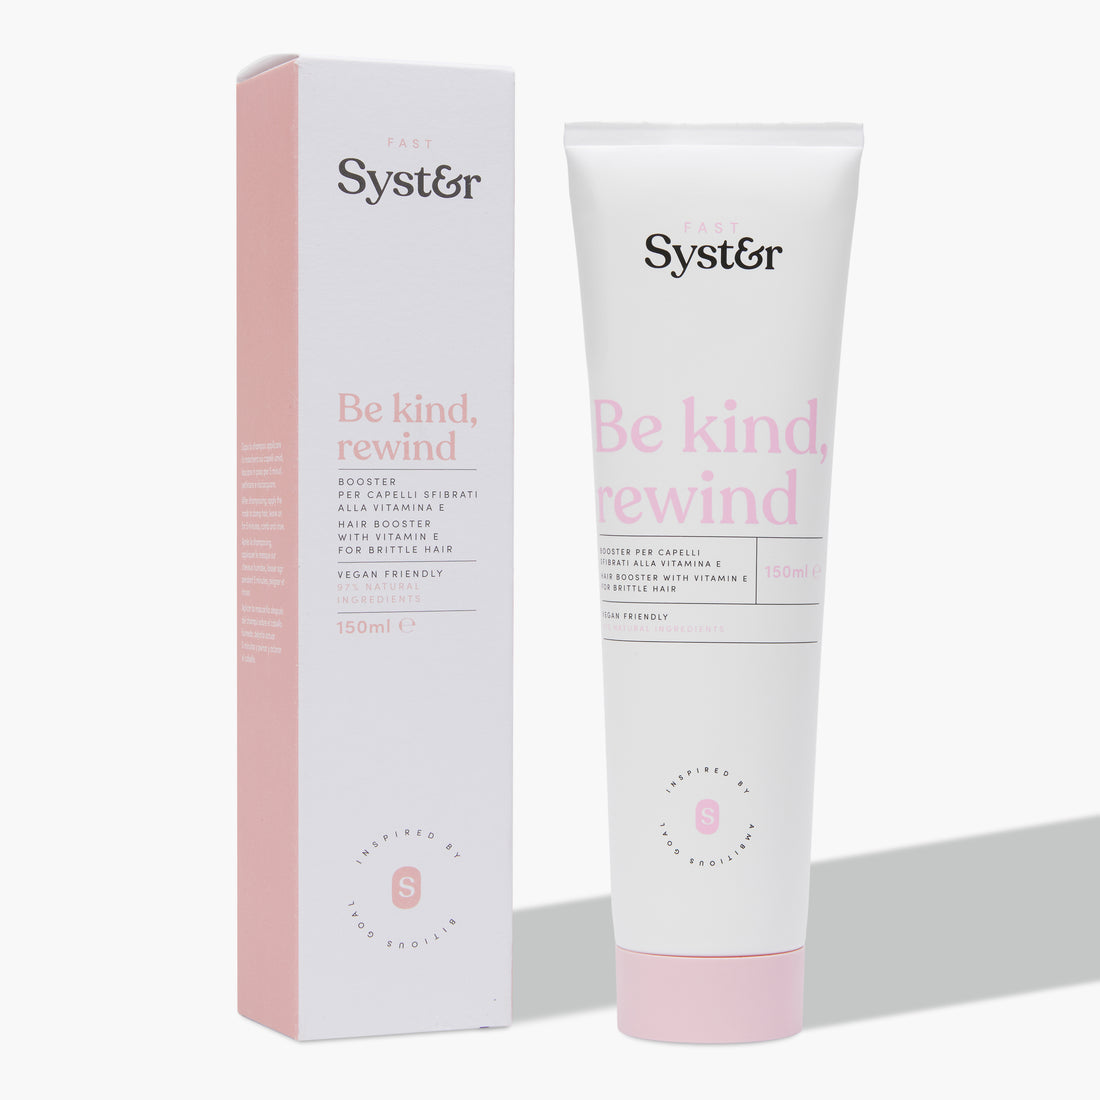 Be kind, rewinf vitamin C hair booster Syster